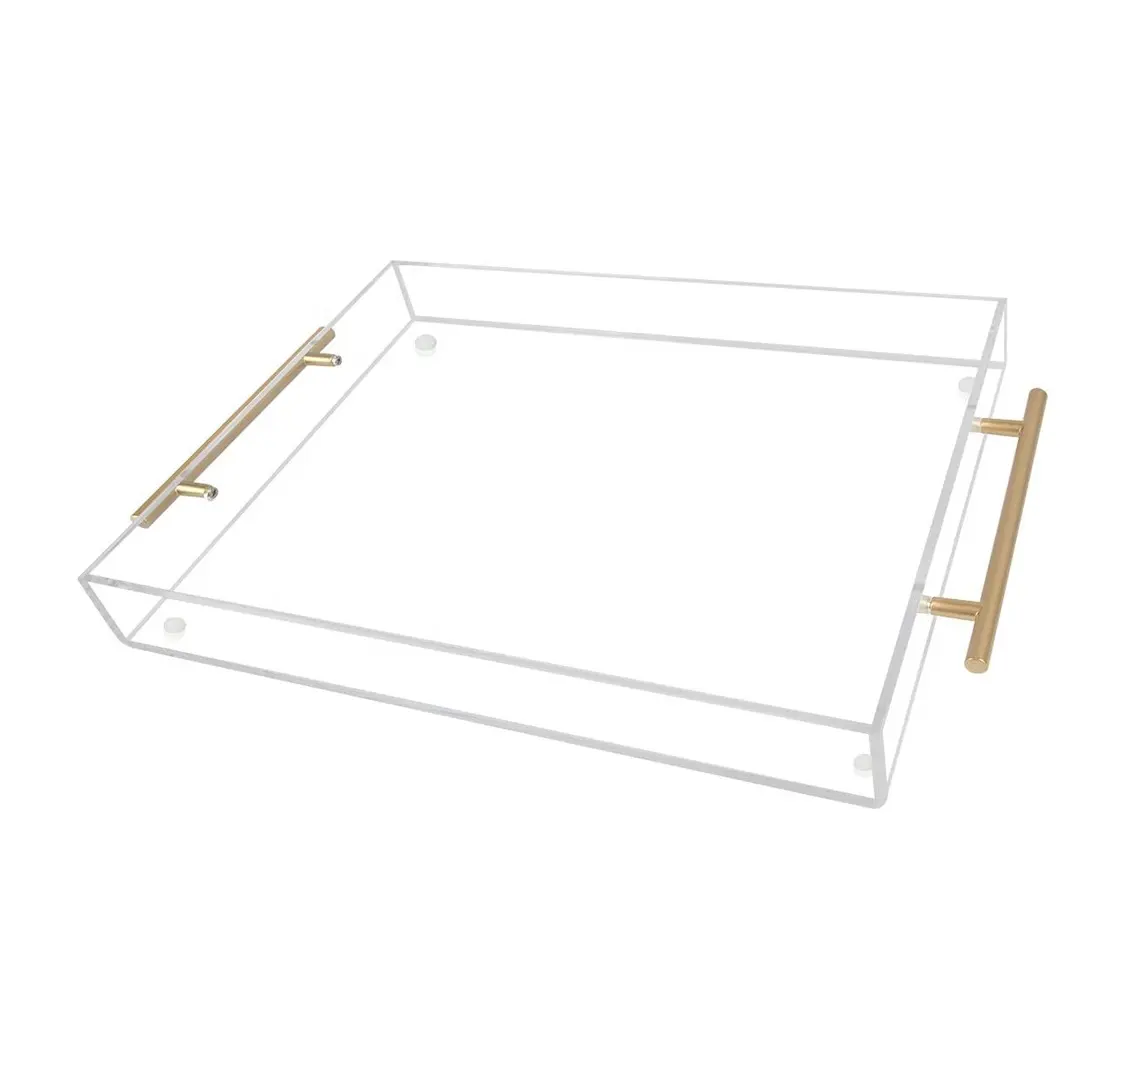 Clear Acrylic Serving Tray with Gold Metal Handles for Spill-Proof Stackable Organizer Food Drinks Server